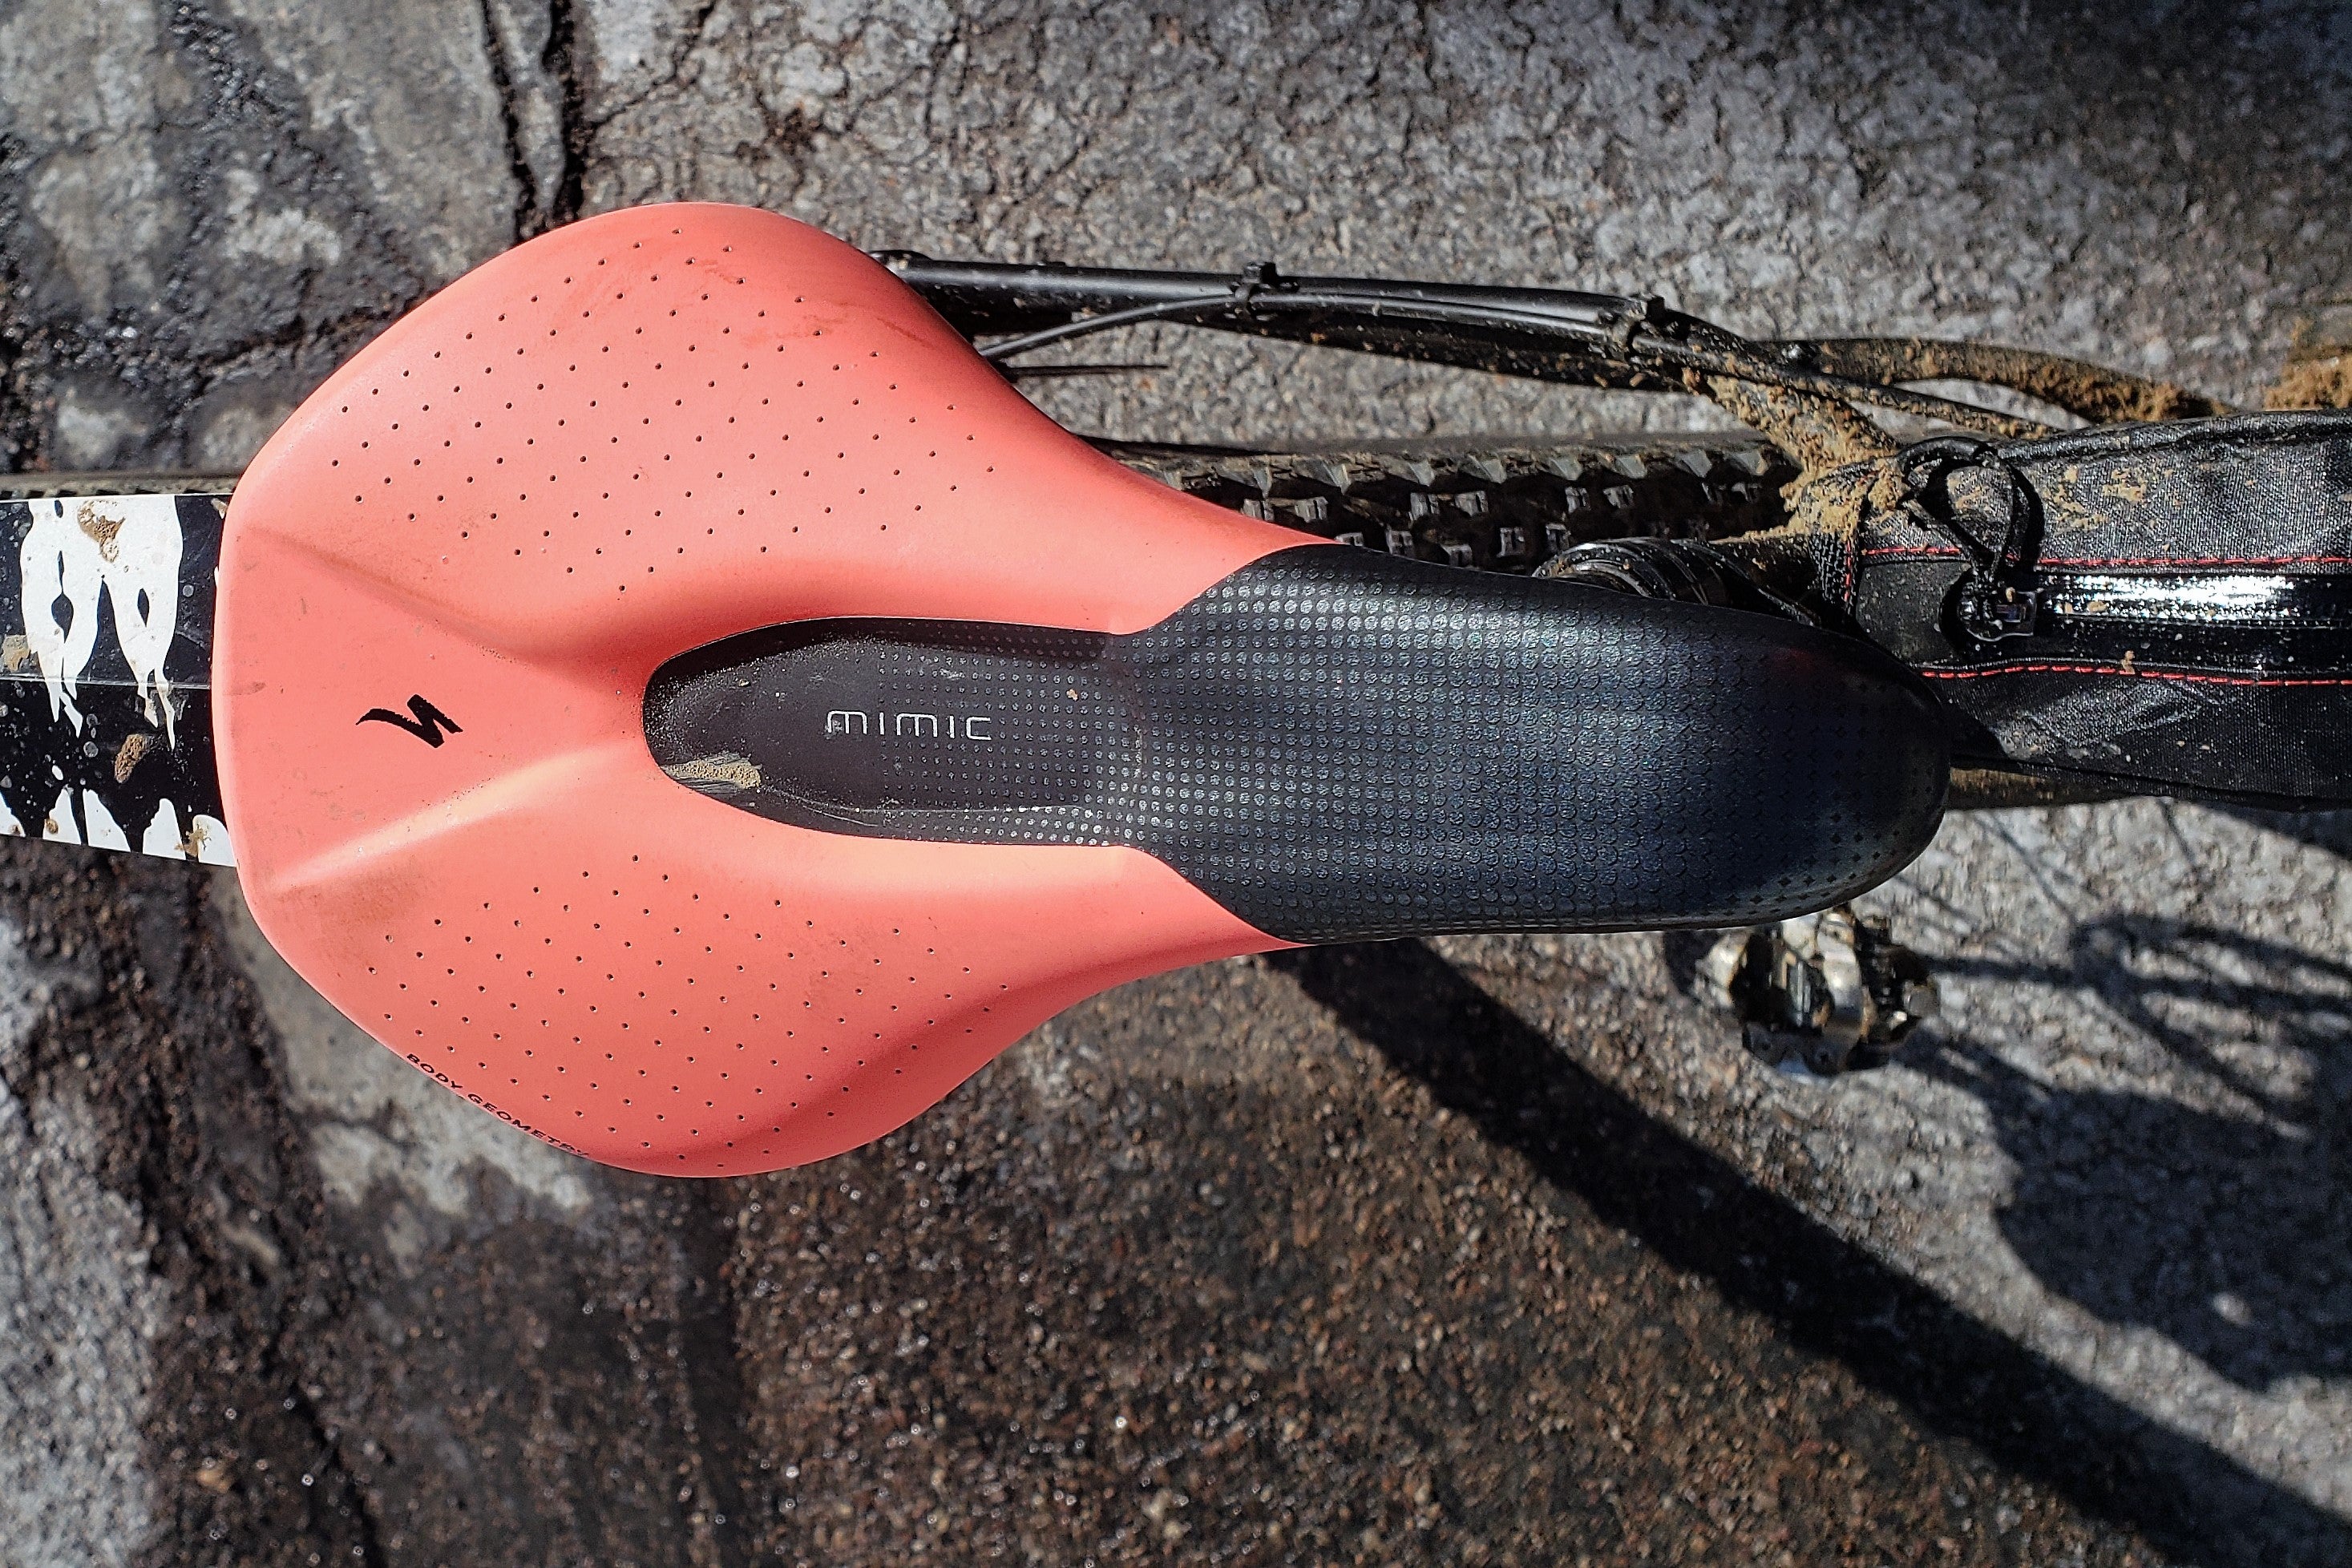 Review: Specialized Power Expert Mimic saddle - Velo